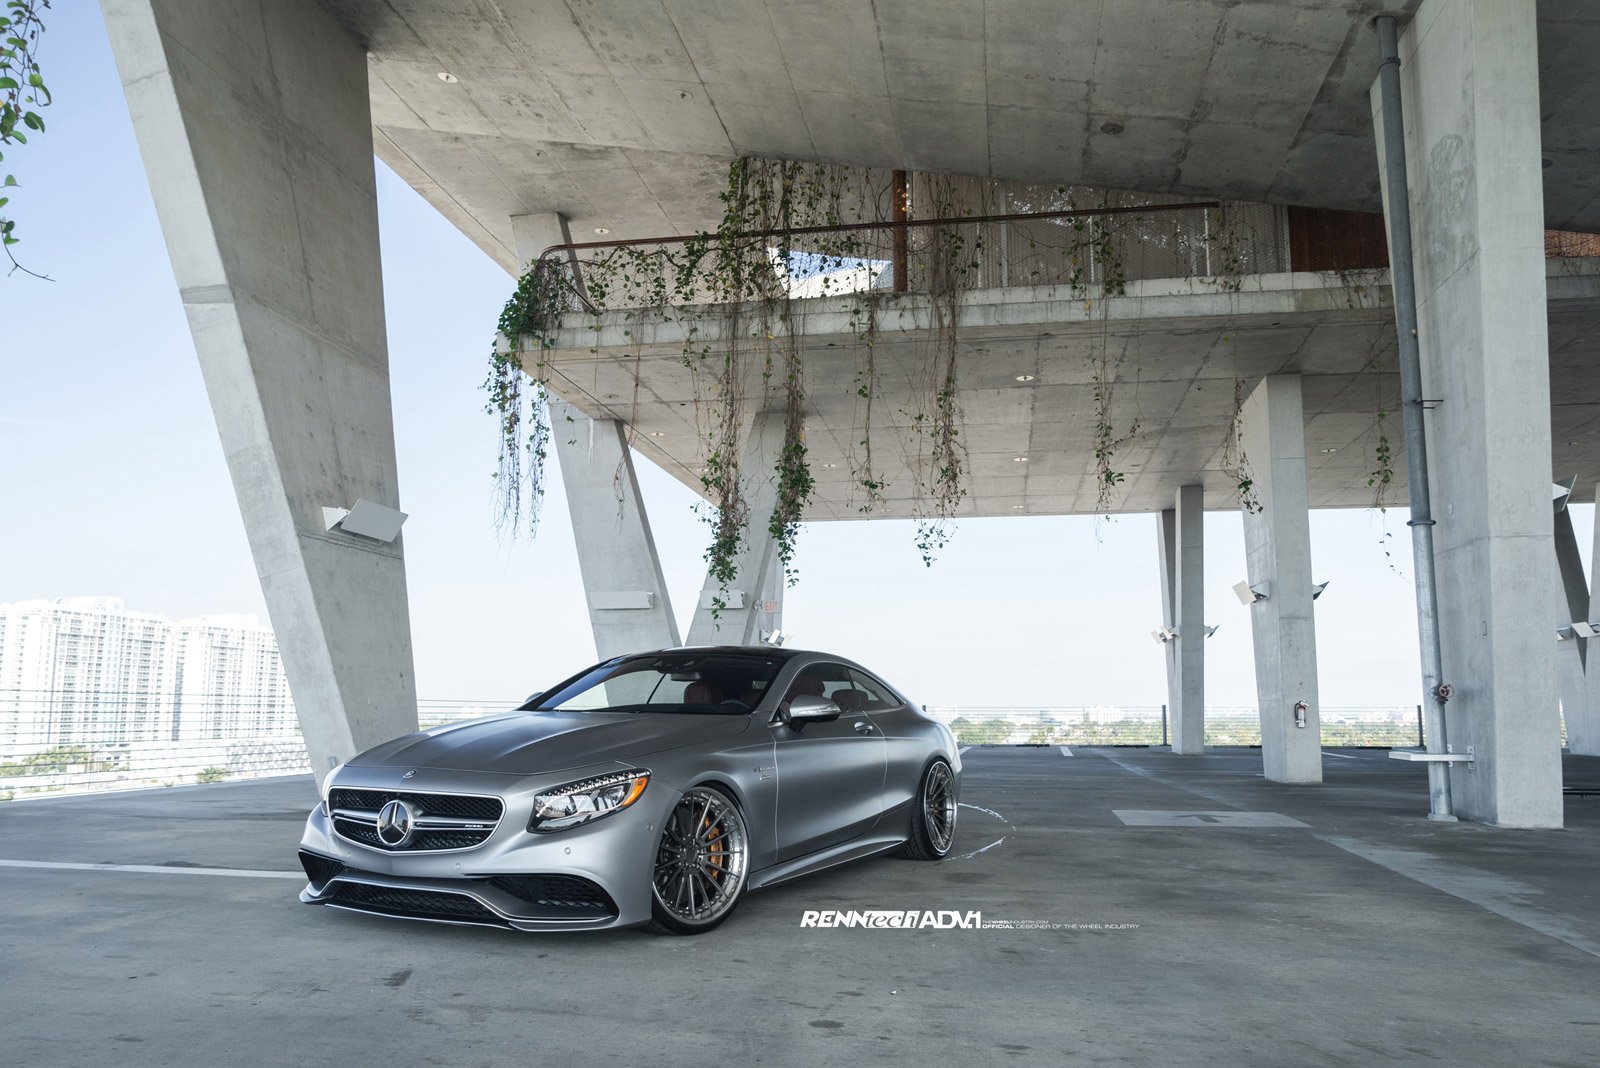 2014, Adv1, Mercedes, S63, Coupe, Supercars, Wheels Wallpaper